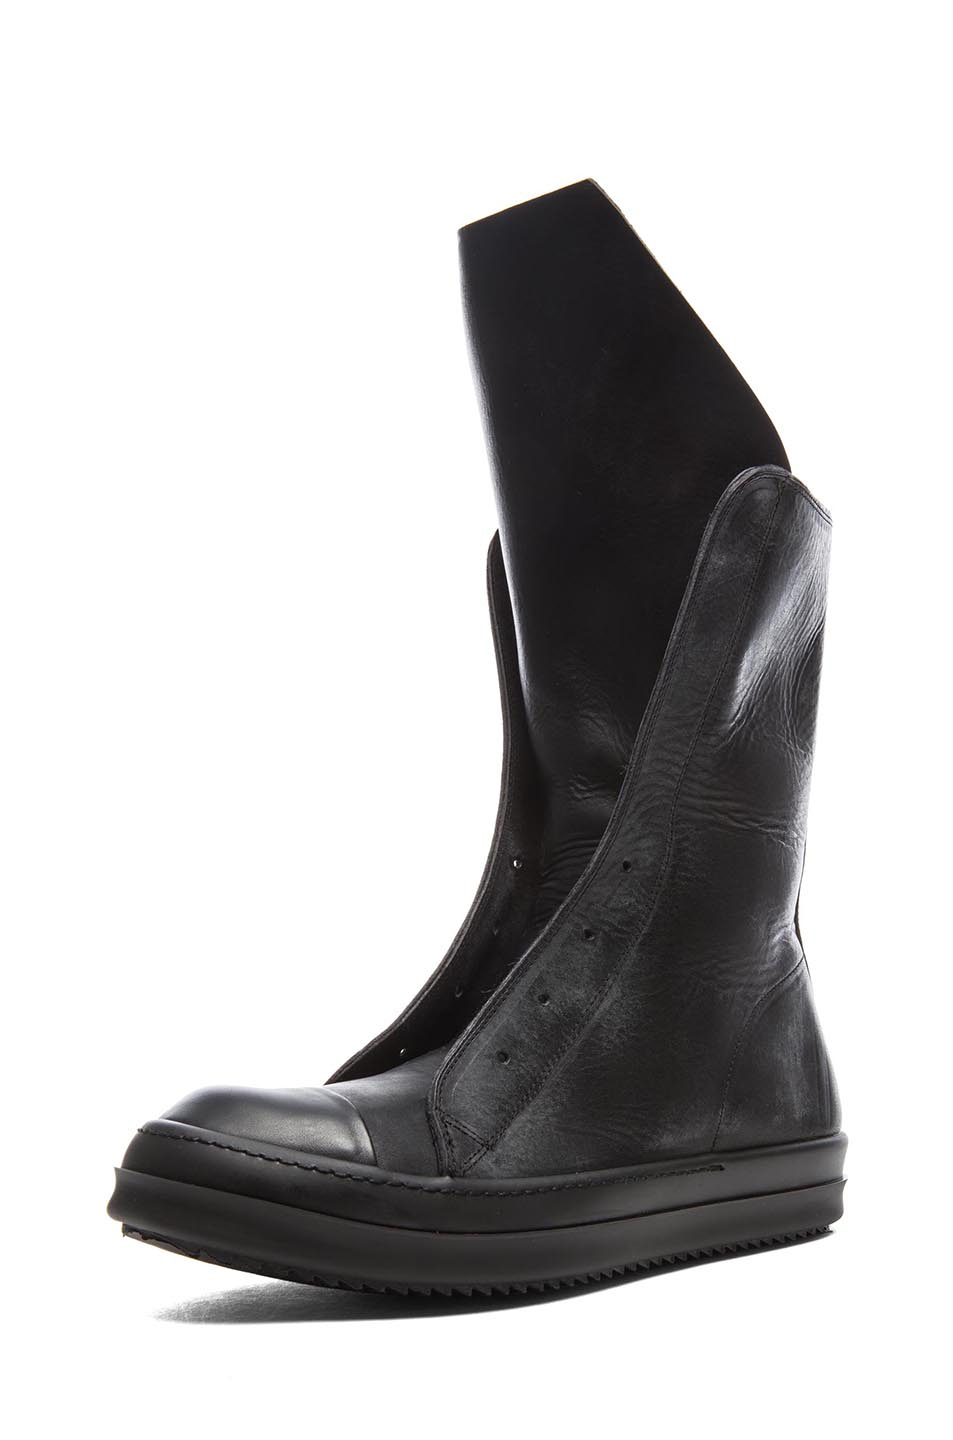 Lyst - Rick Owens Mens Leather Sneaker Boots in Black